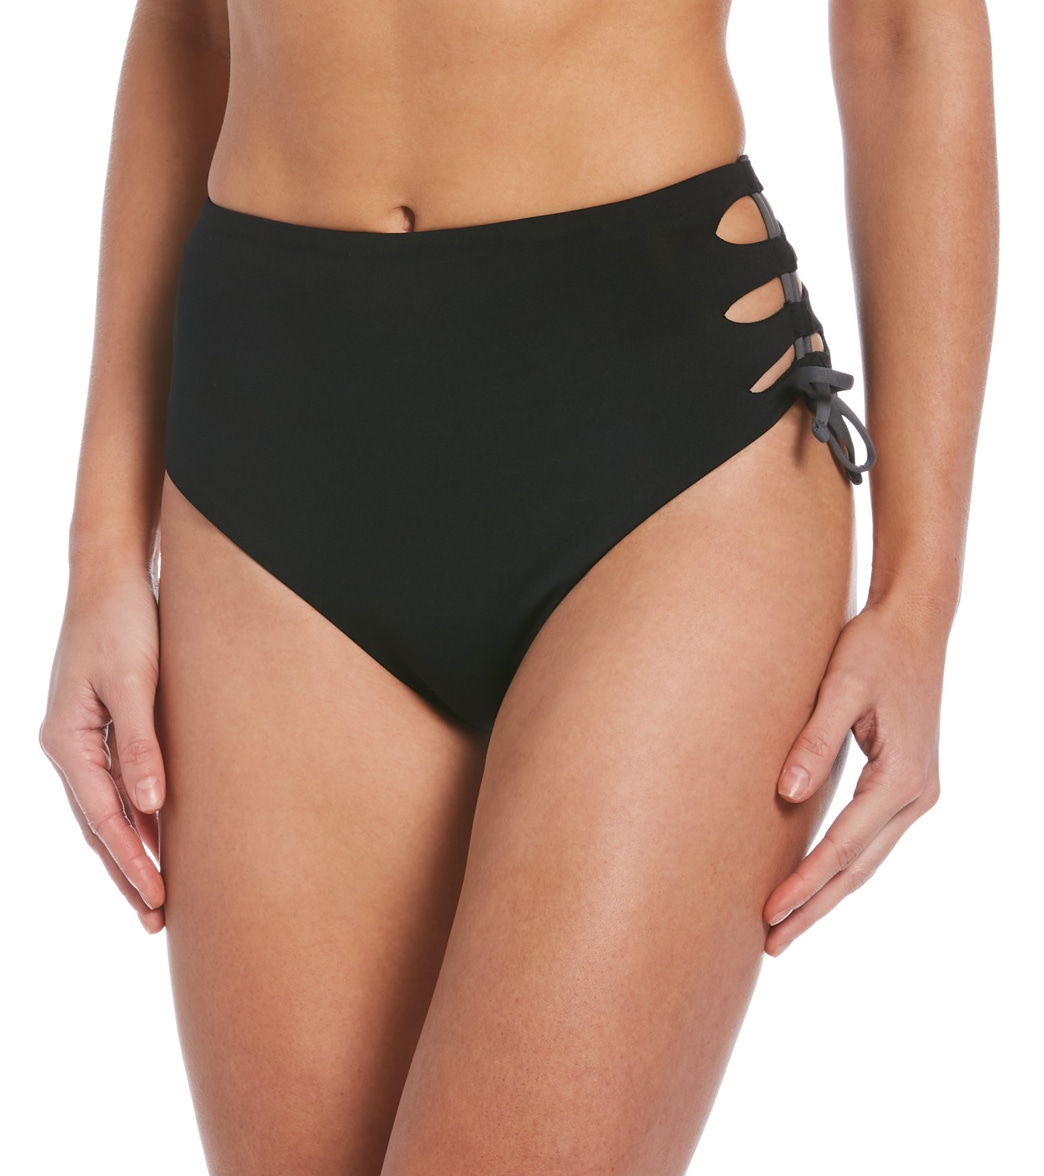 Nike Women's Solid Lace-Up High Waist Cheeky Bottom - Black Large - Swimoutlet.com